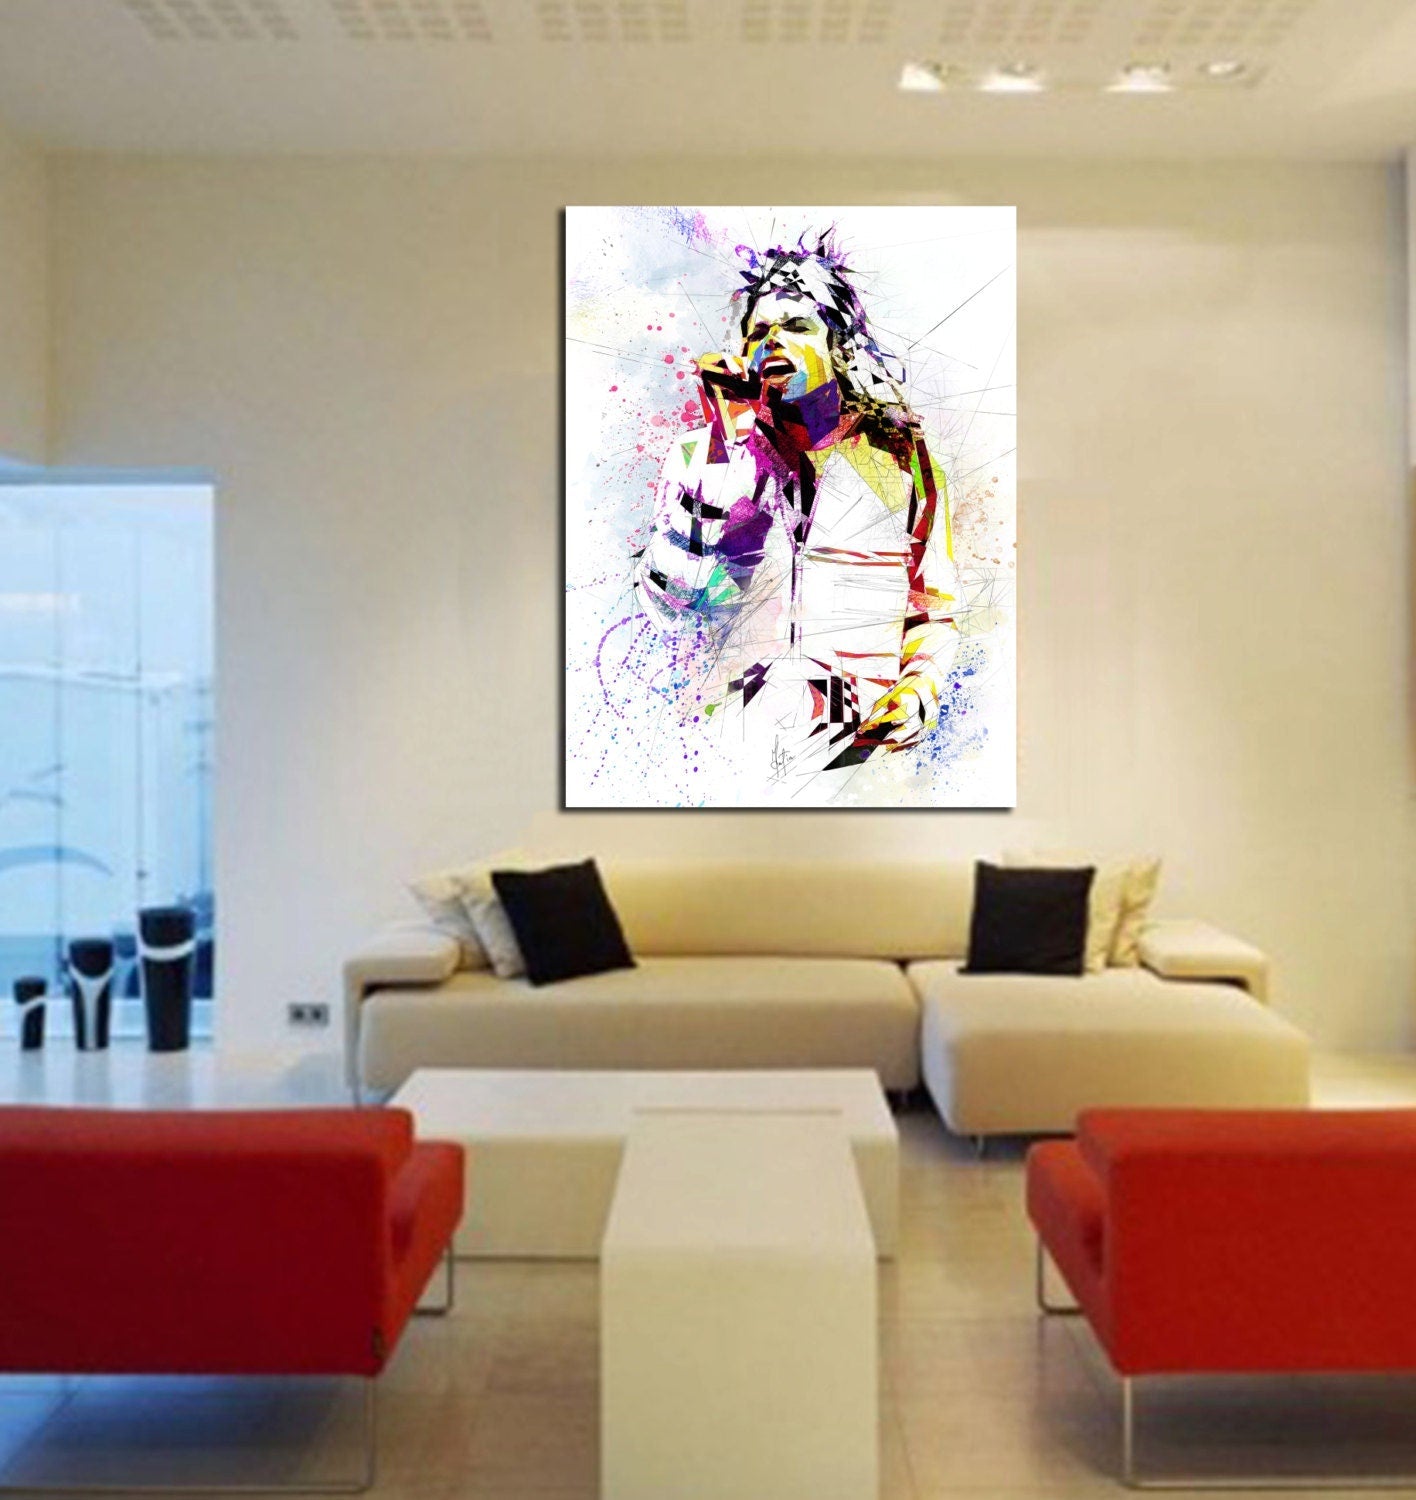 michael jackson wall decals